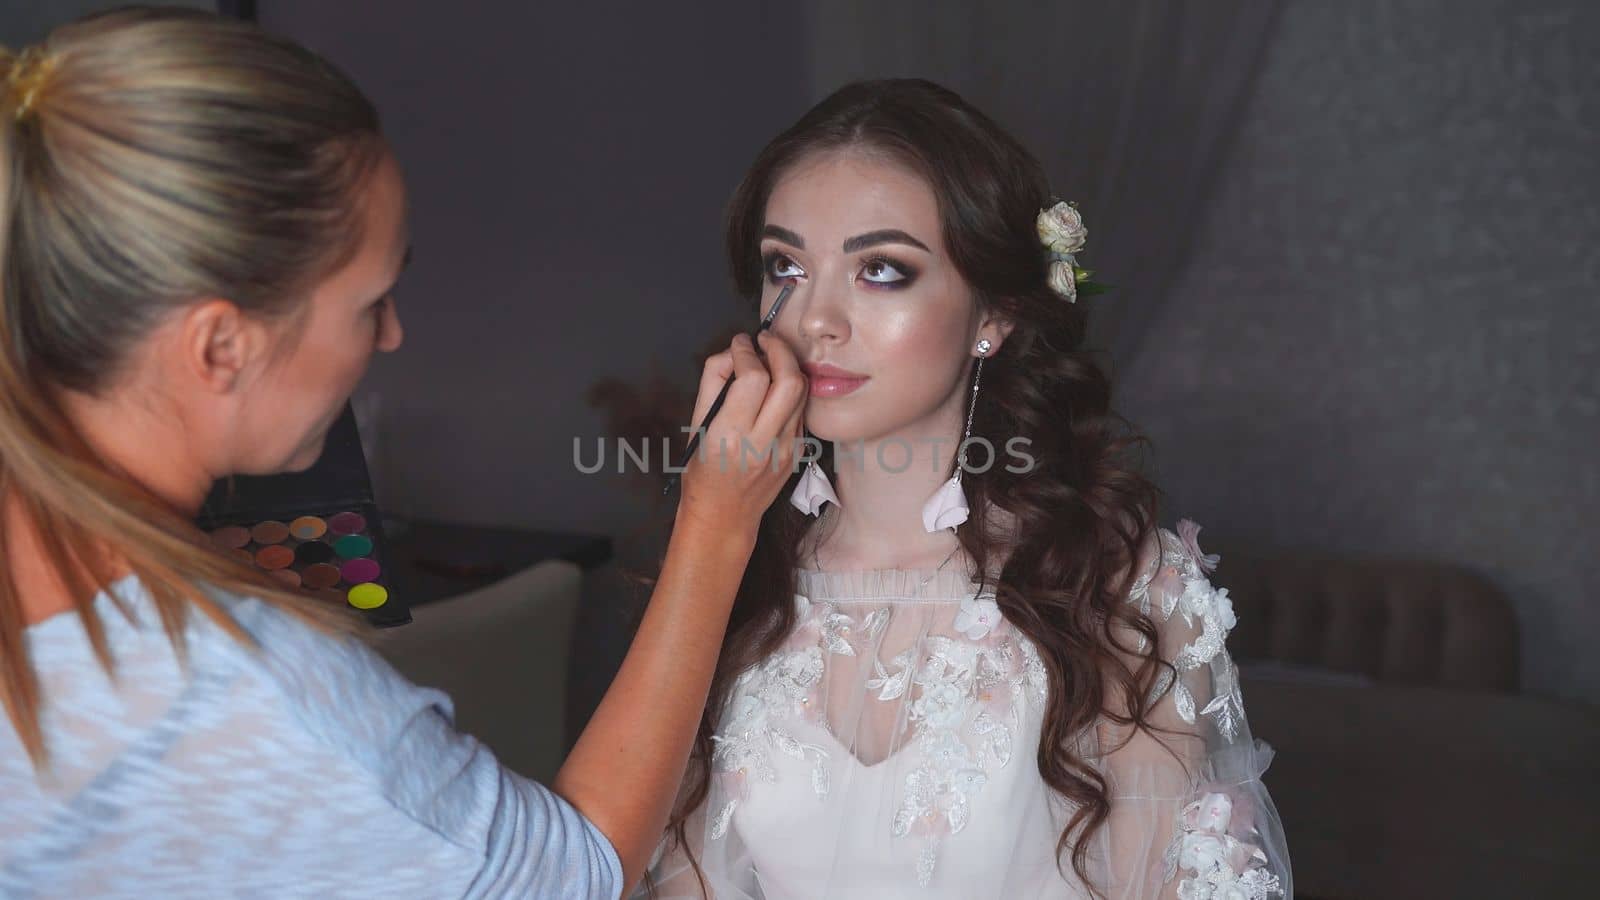 Makeup artist paints an eye for the bride on her wedding day